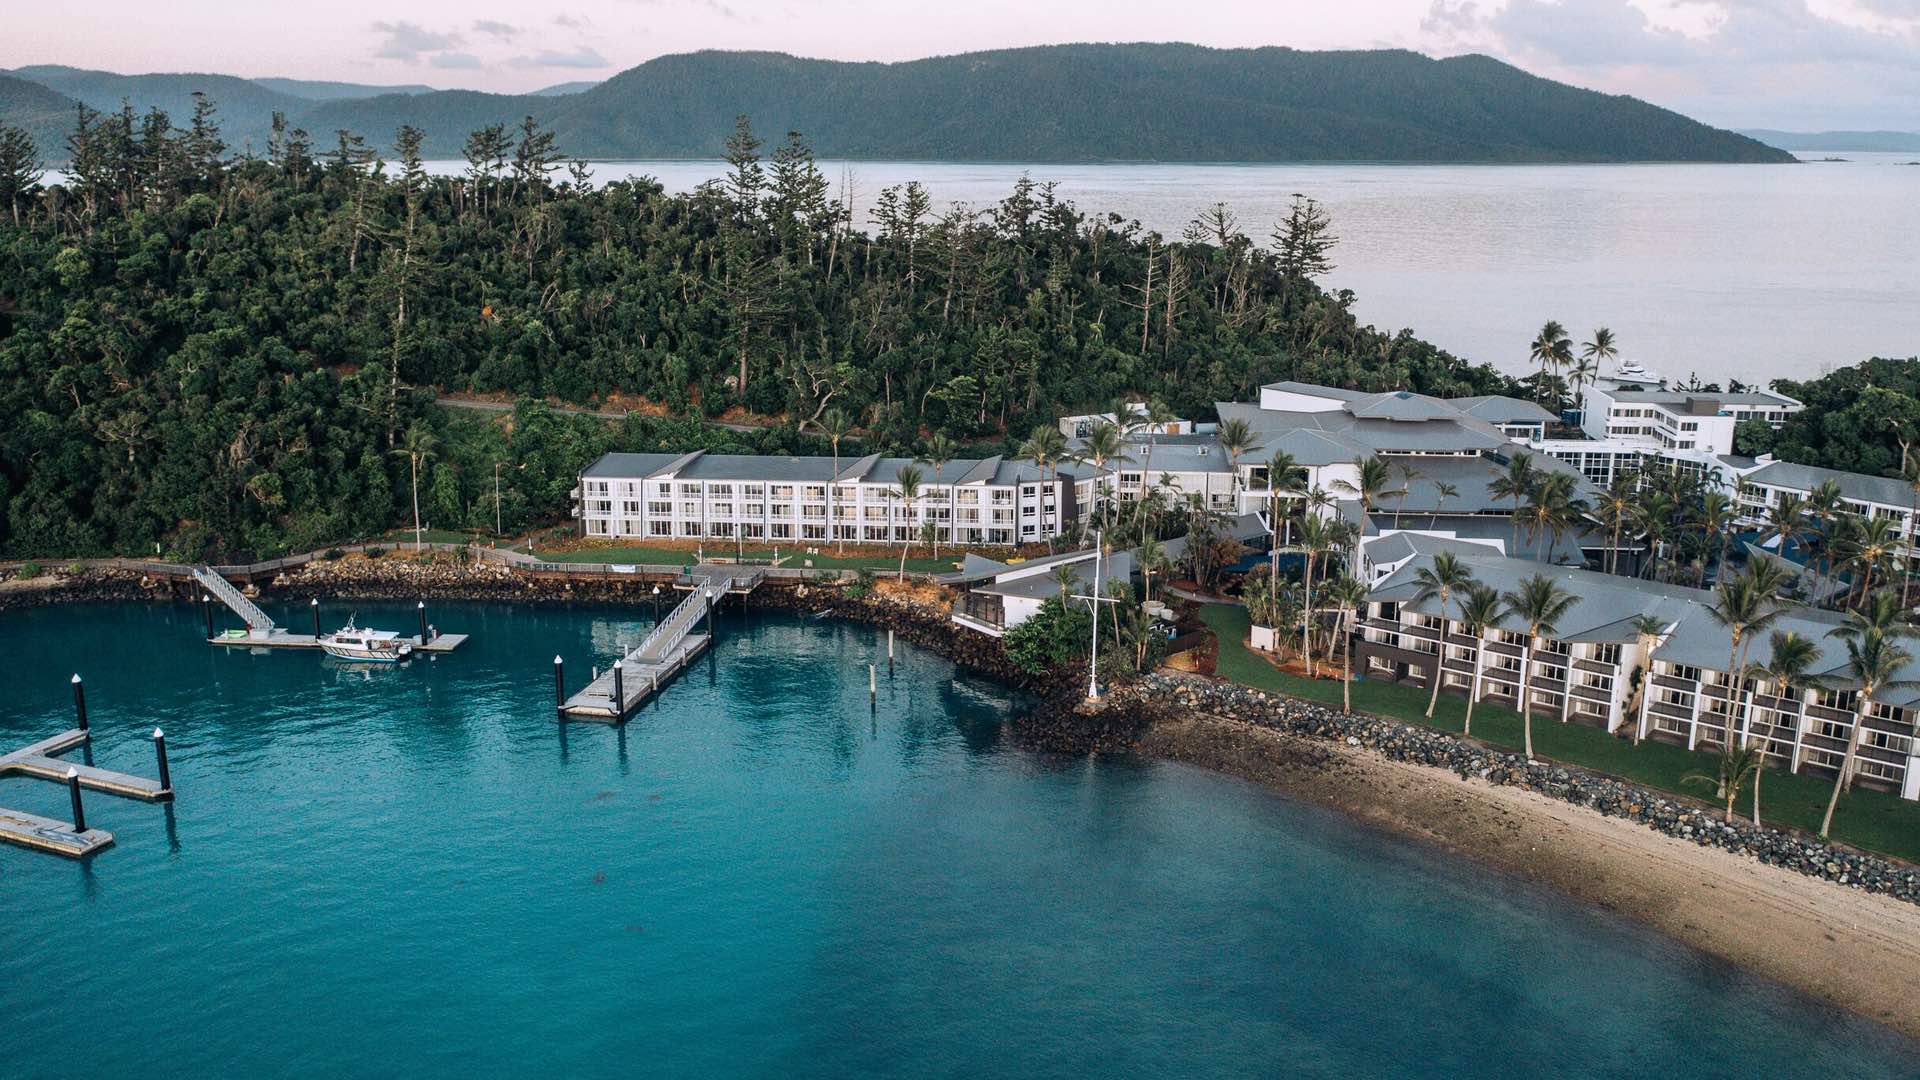 The Whitsundays' Luxury Daydream Island Resort Has Reopened After a $100 Million Refurb